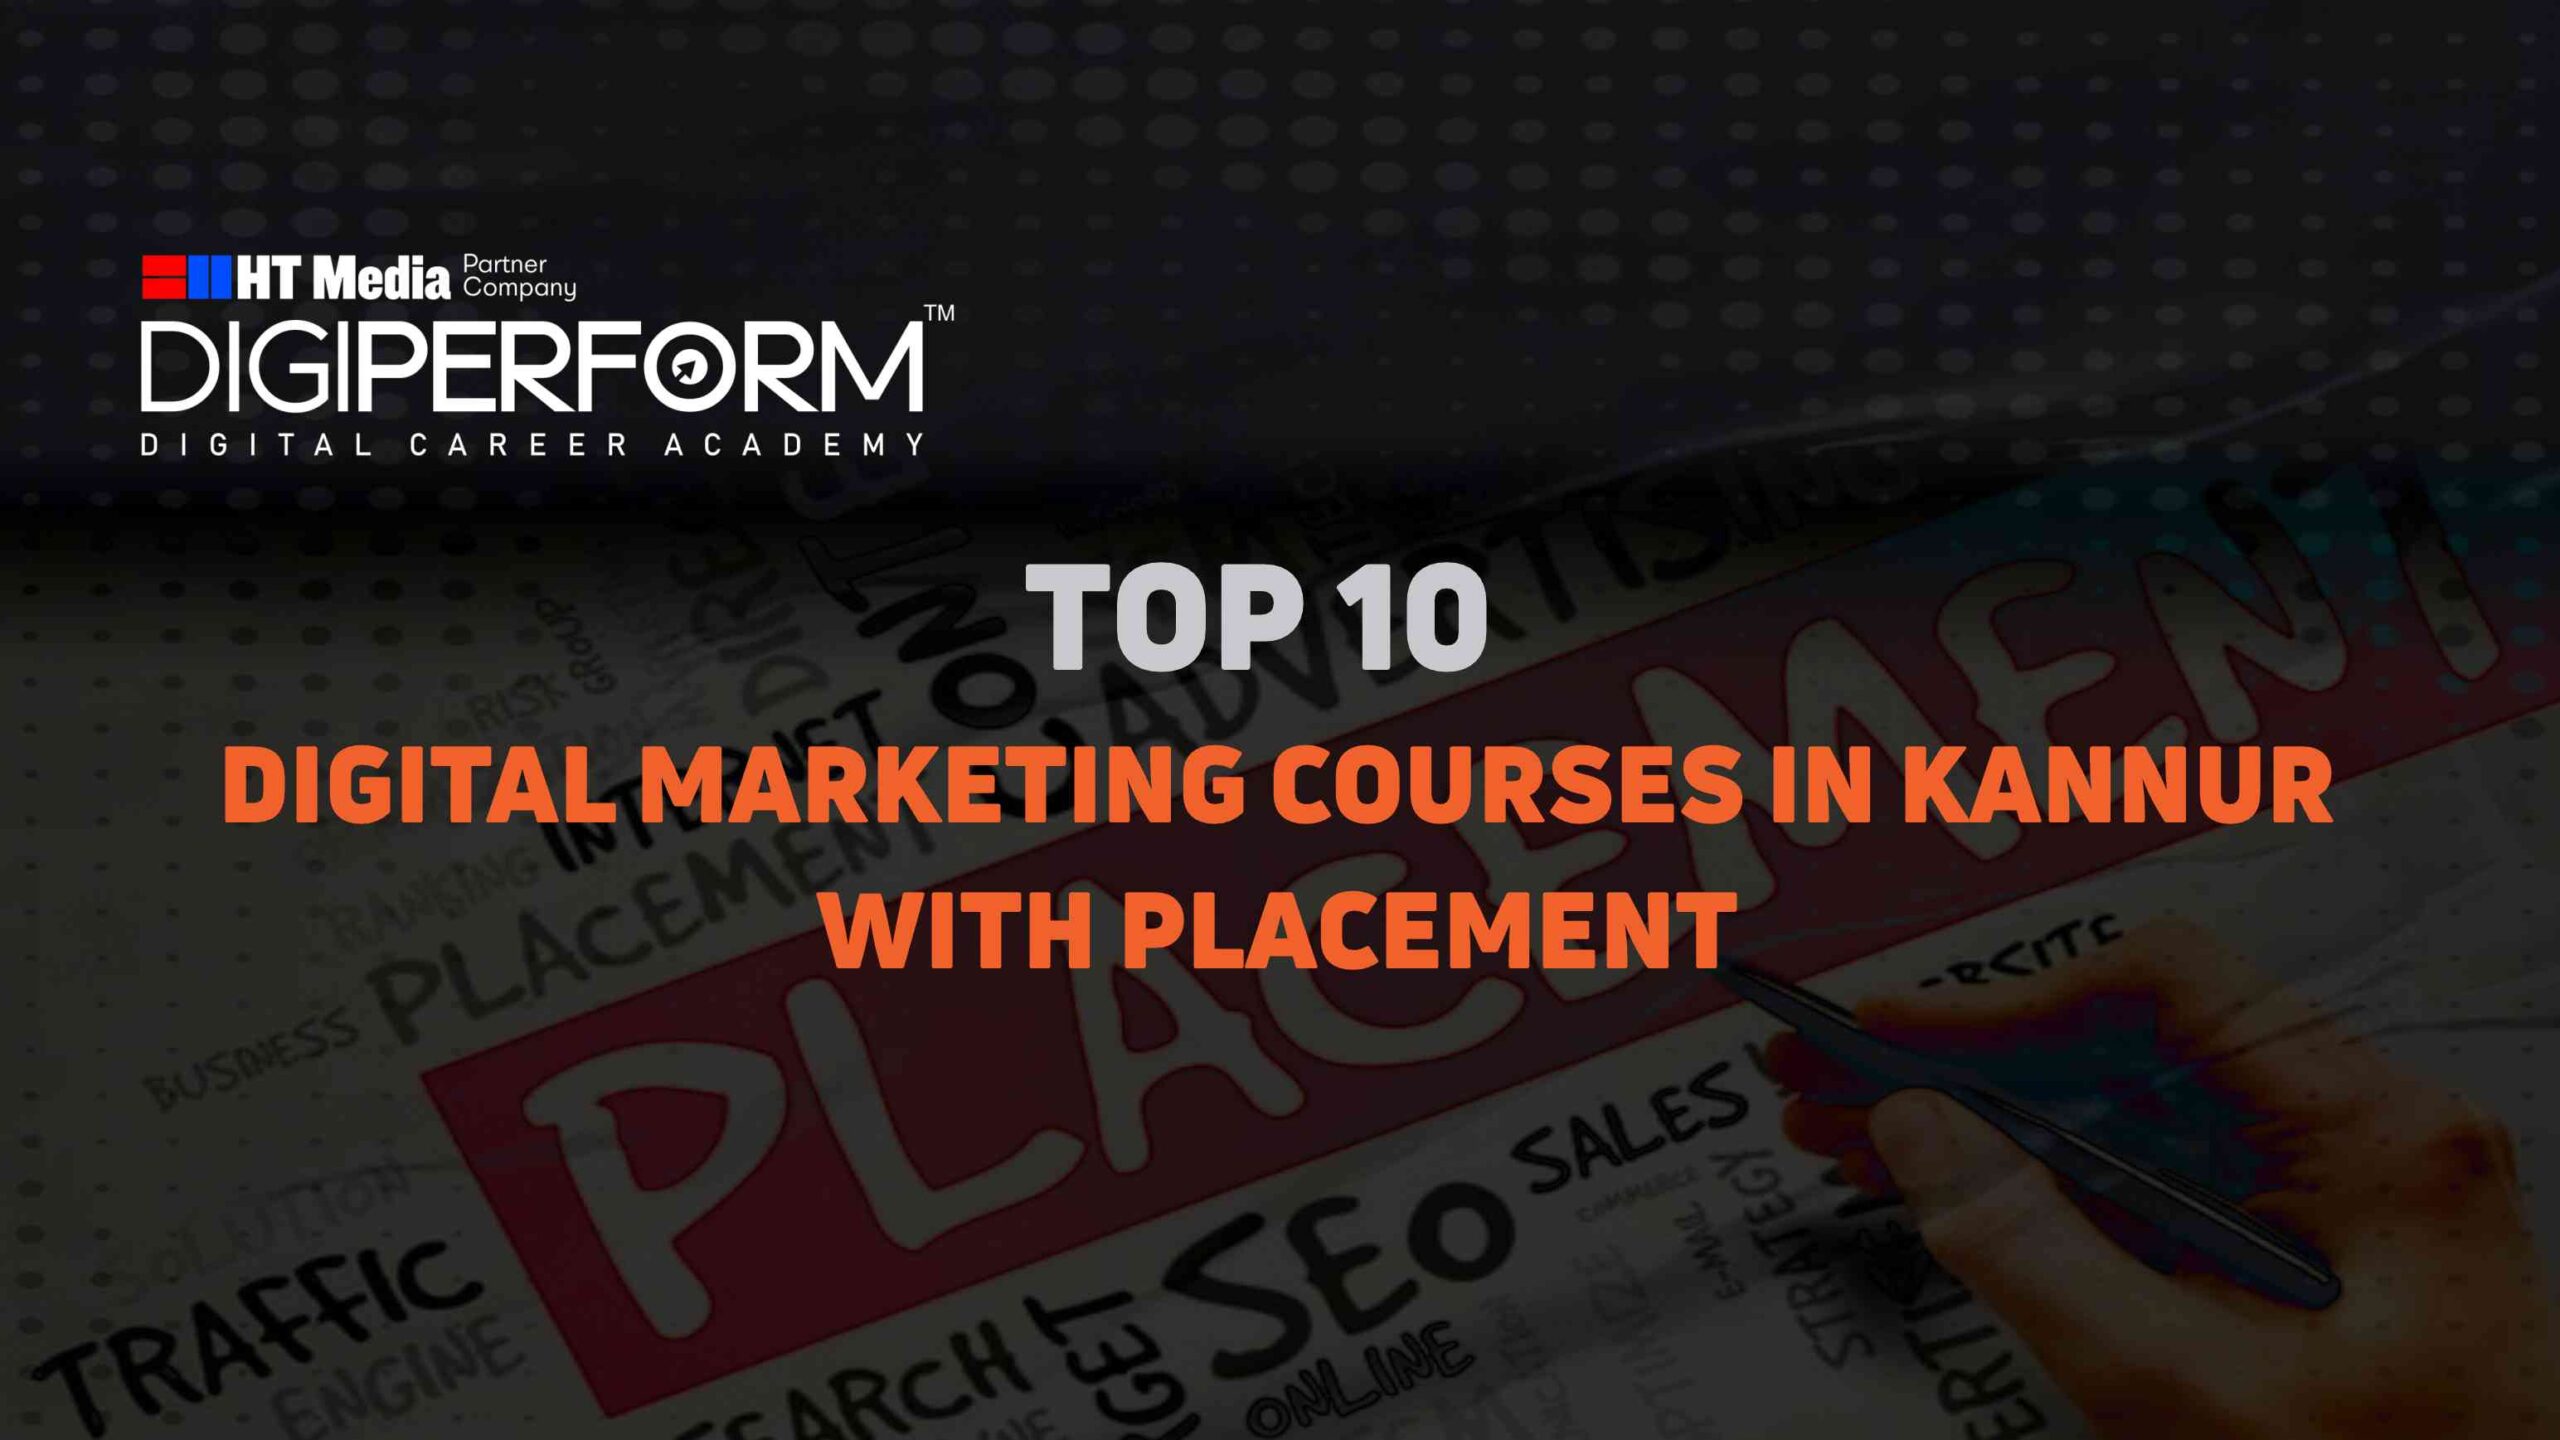 Top 10 Digital Marketing Courses in Kannur with Placement